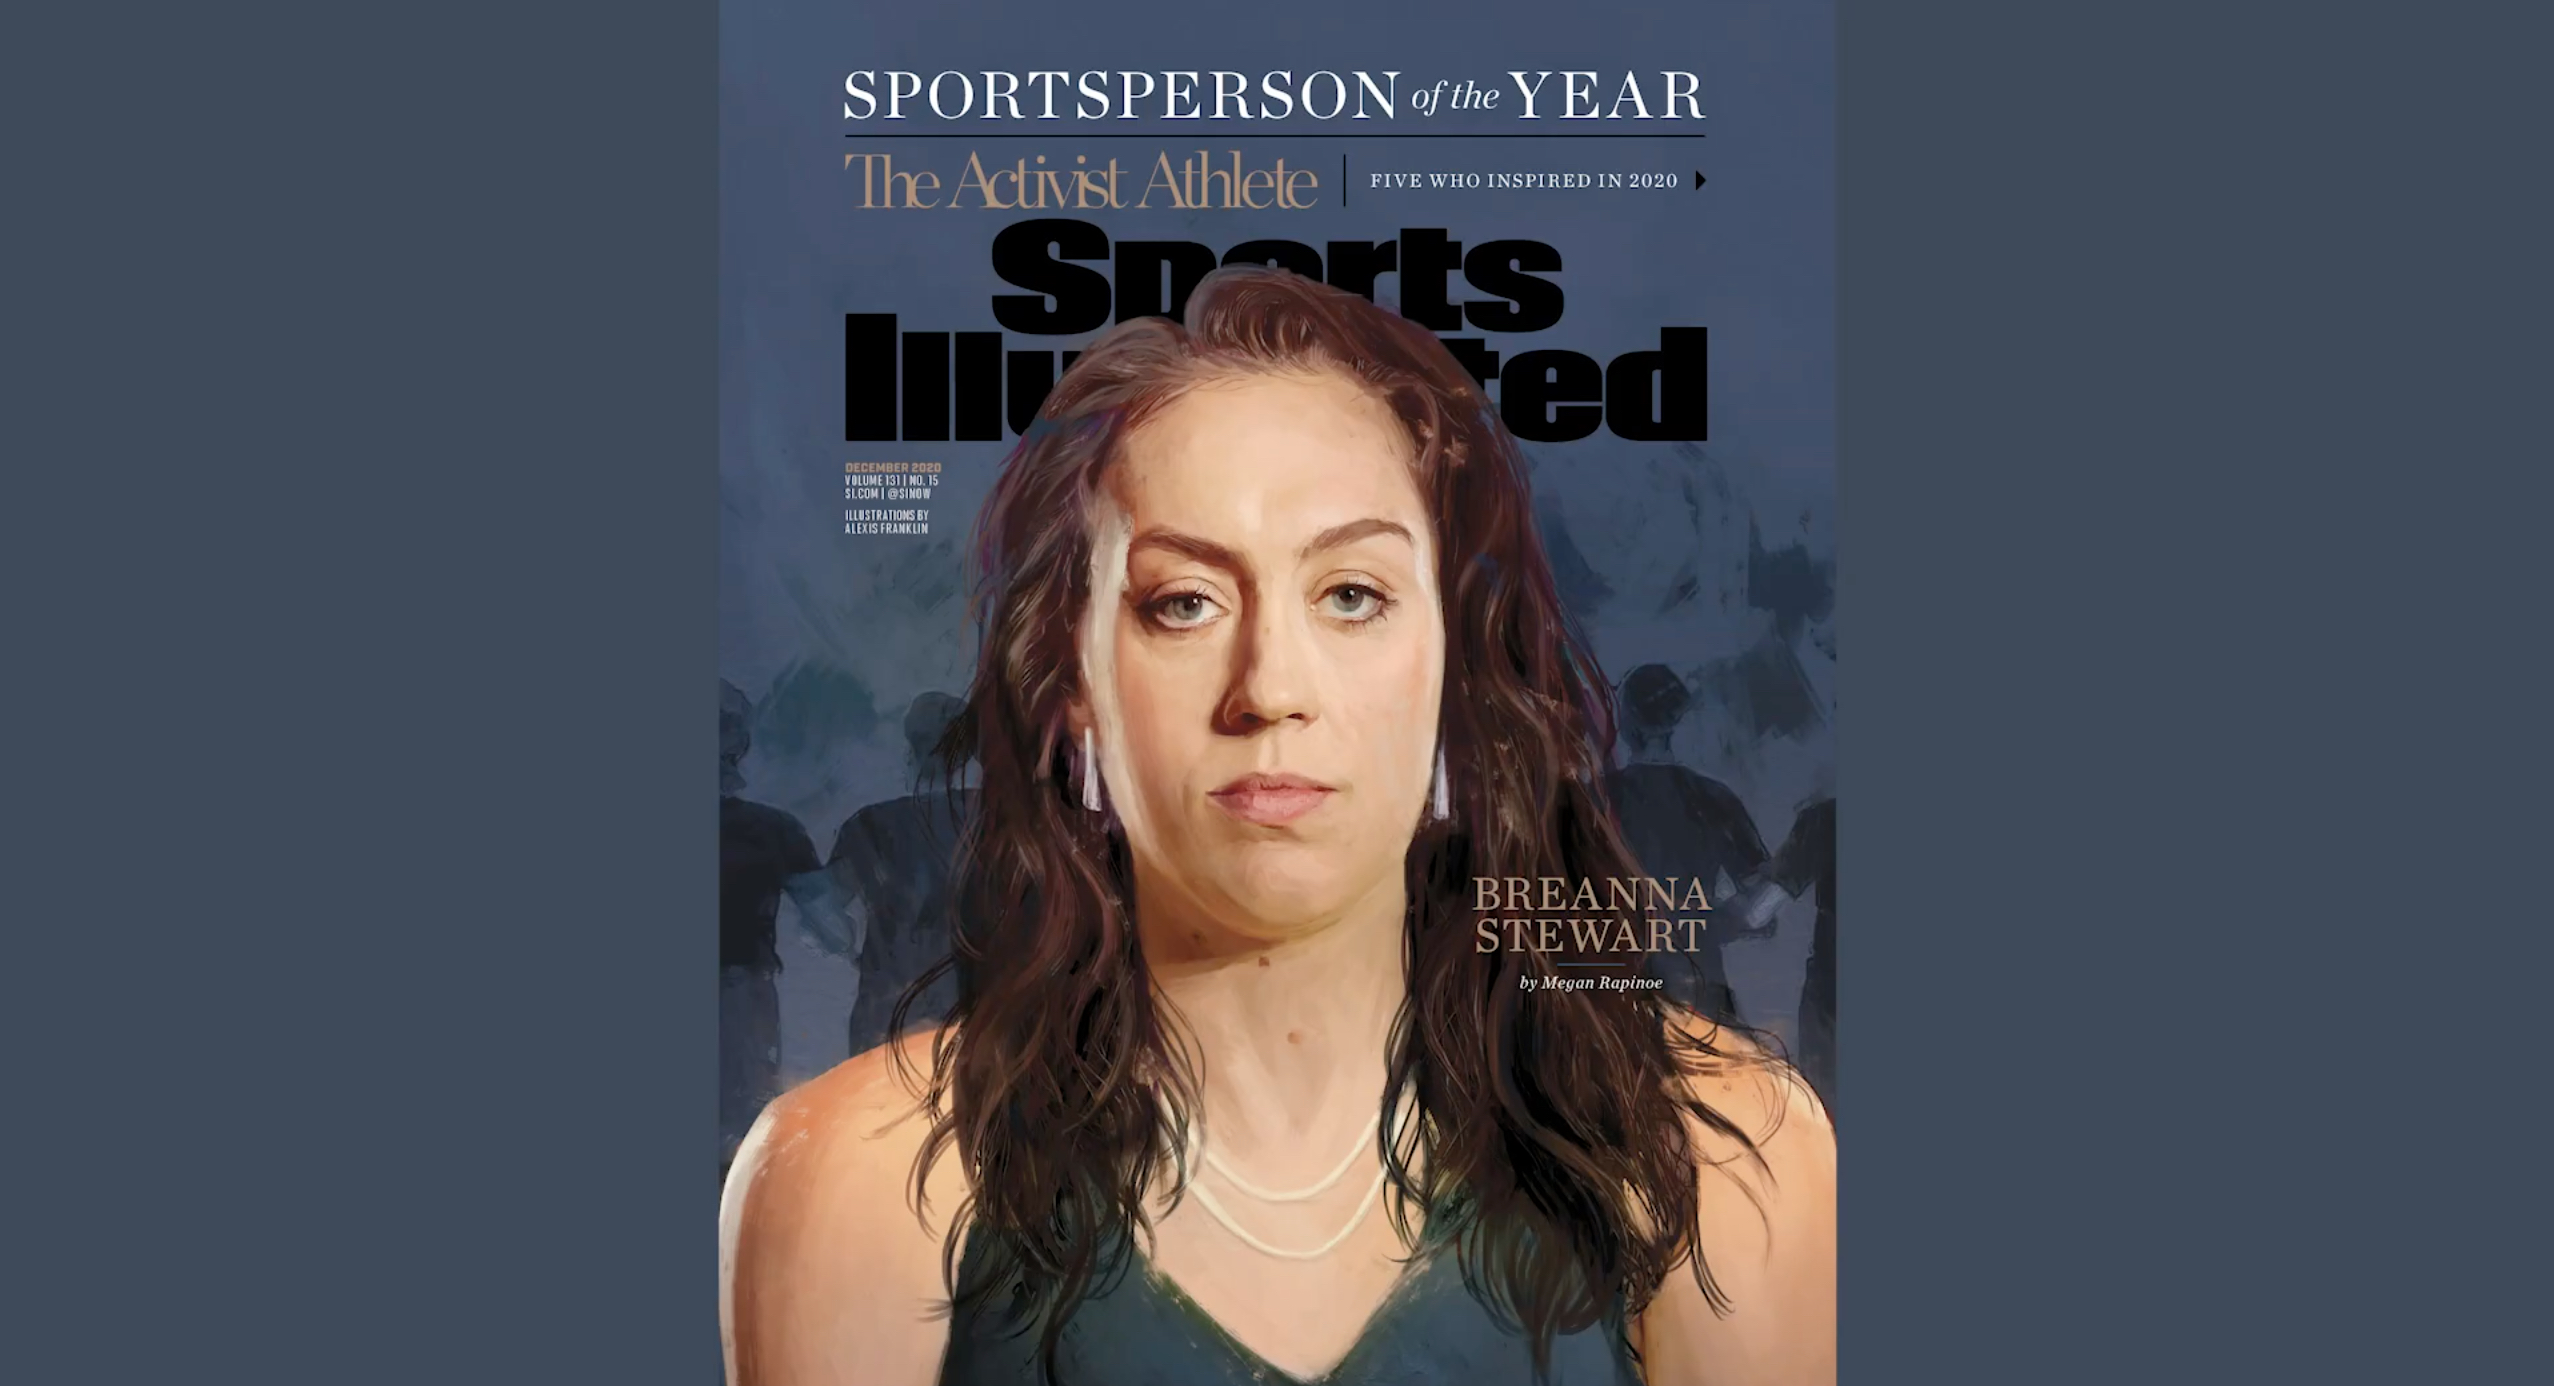 Breanna Stewart of the Seattle Storm on the cover of Sports Illustrated's as one of the magazine's 2020 Sportsperson of the Year winners.